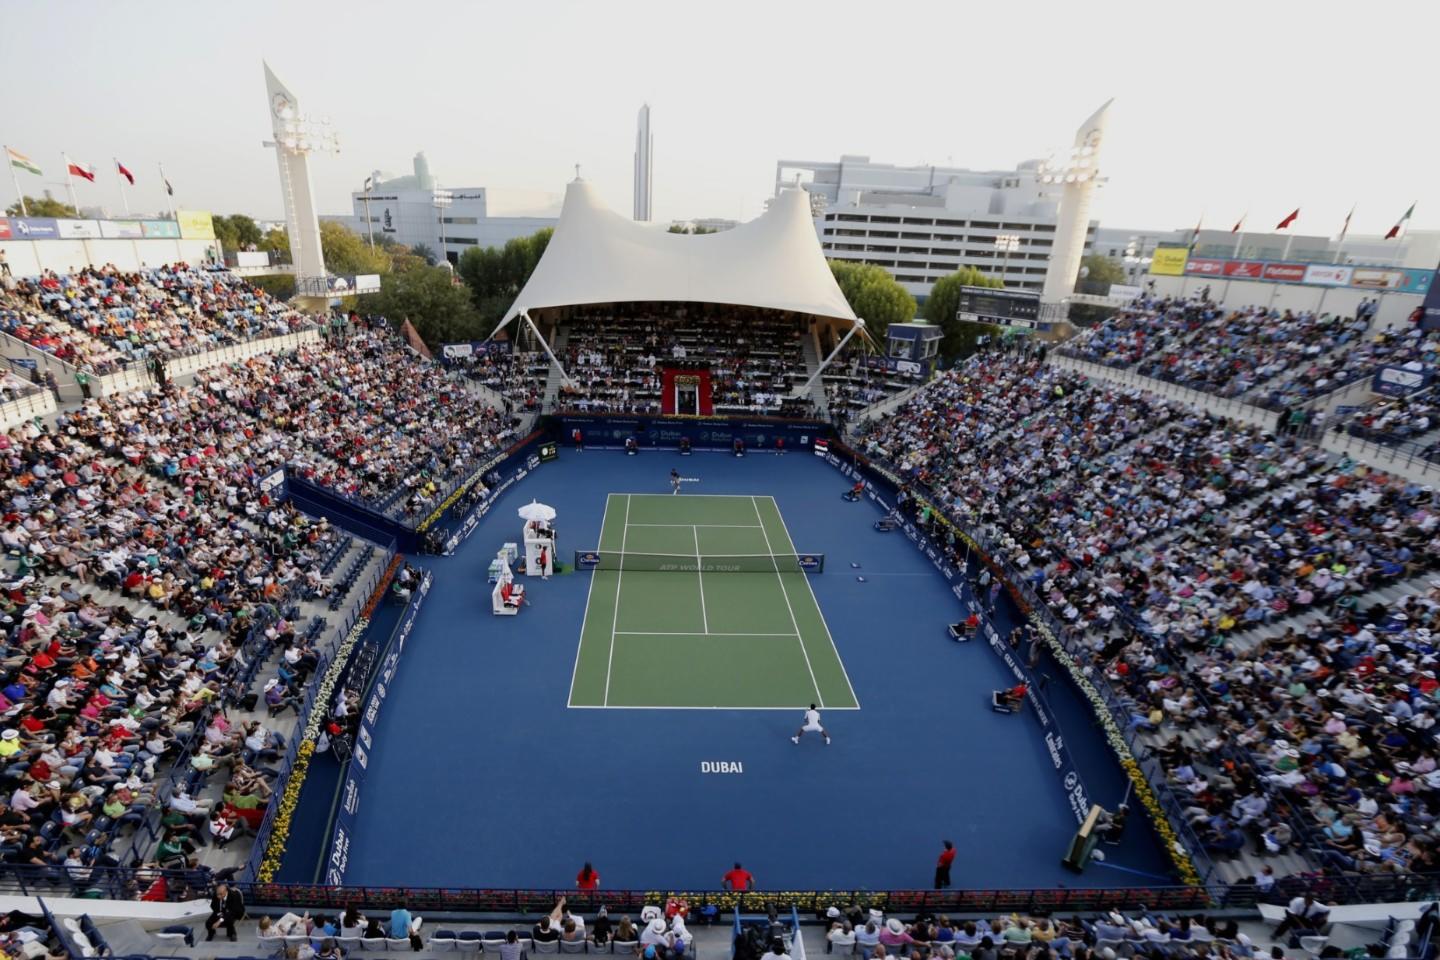 Finishing touches: Dubai Duty Free Tennis Stadium is resurfaced and ready  to welcome the world - Dubai Duty Free Tennis Championships